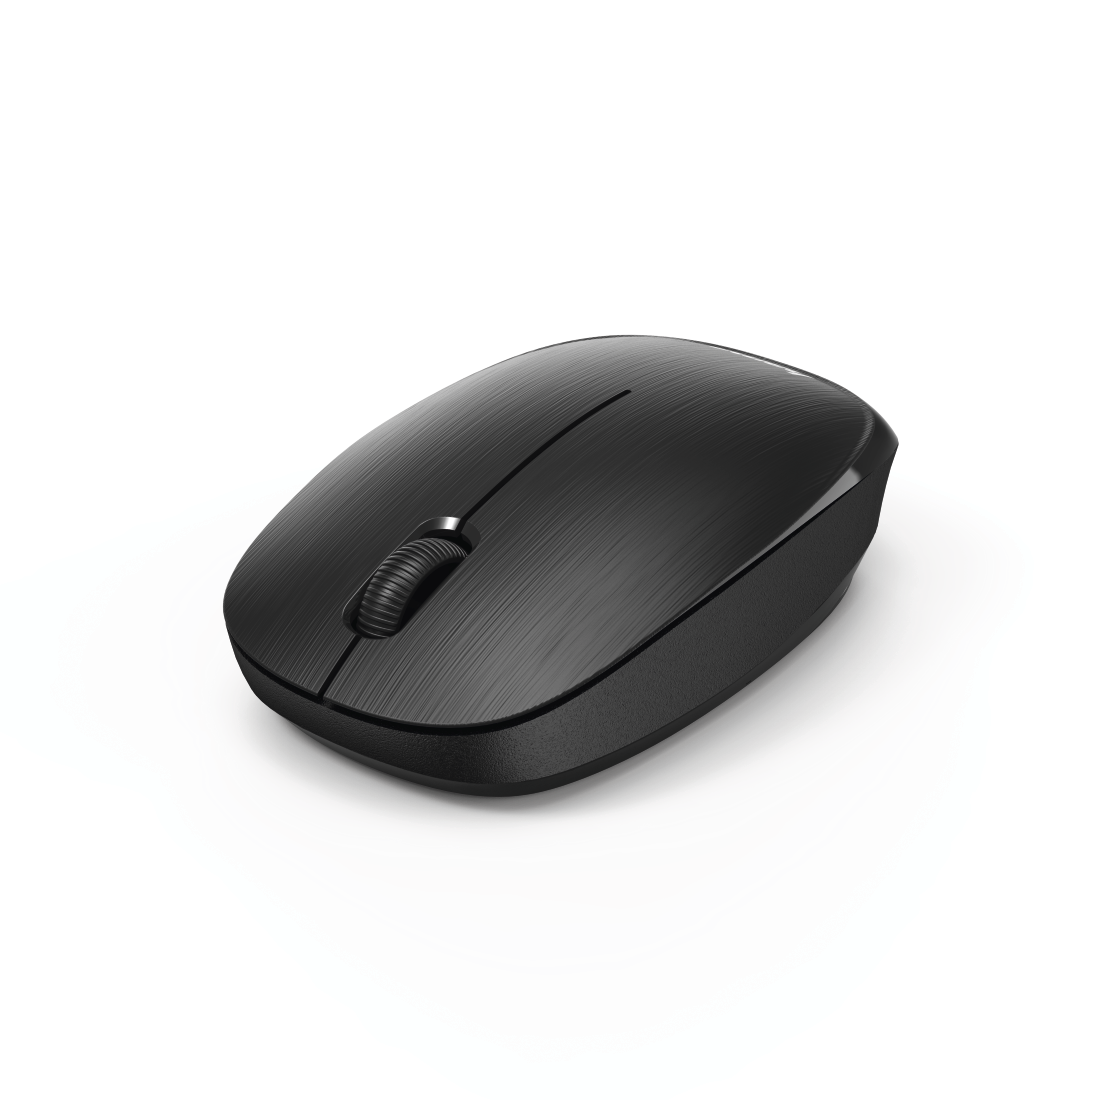 Hama 00182618 MW-110 Optical Wireless Mouse, 3 Buttons, black